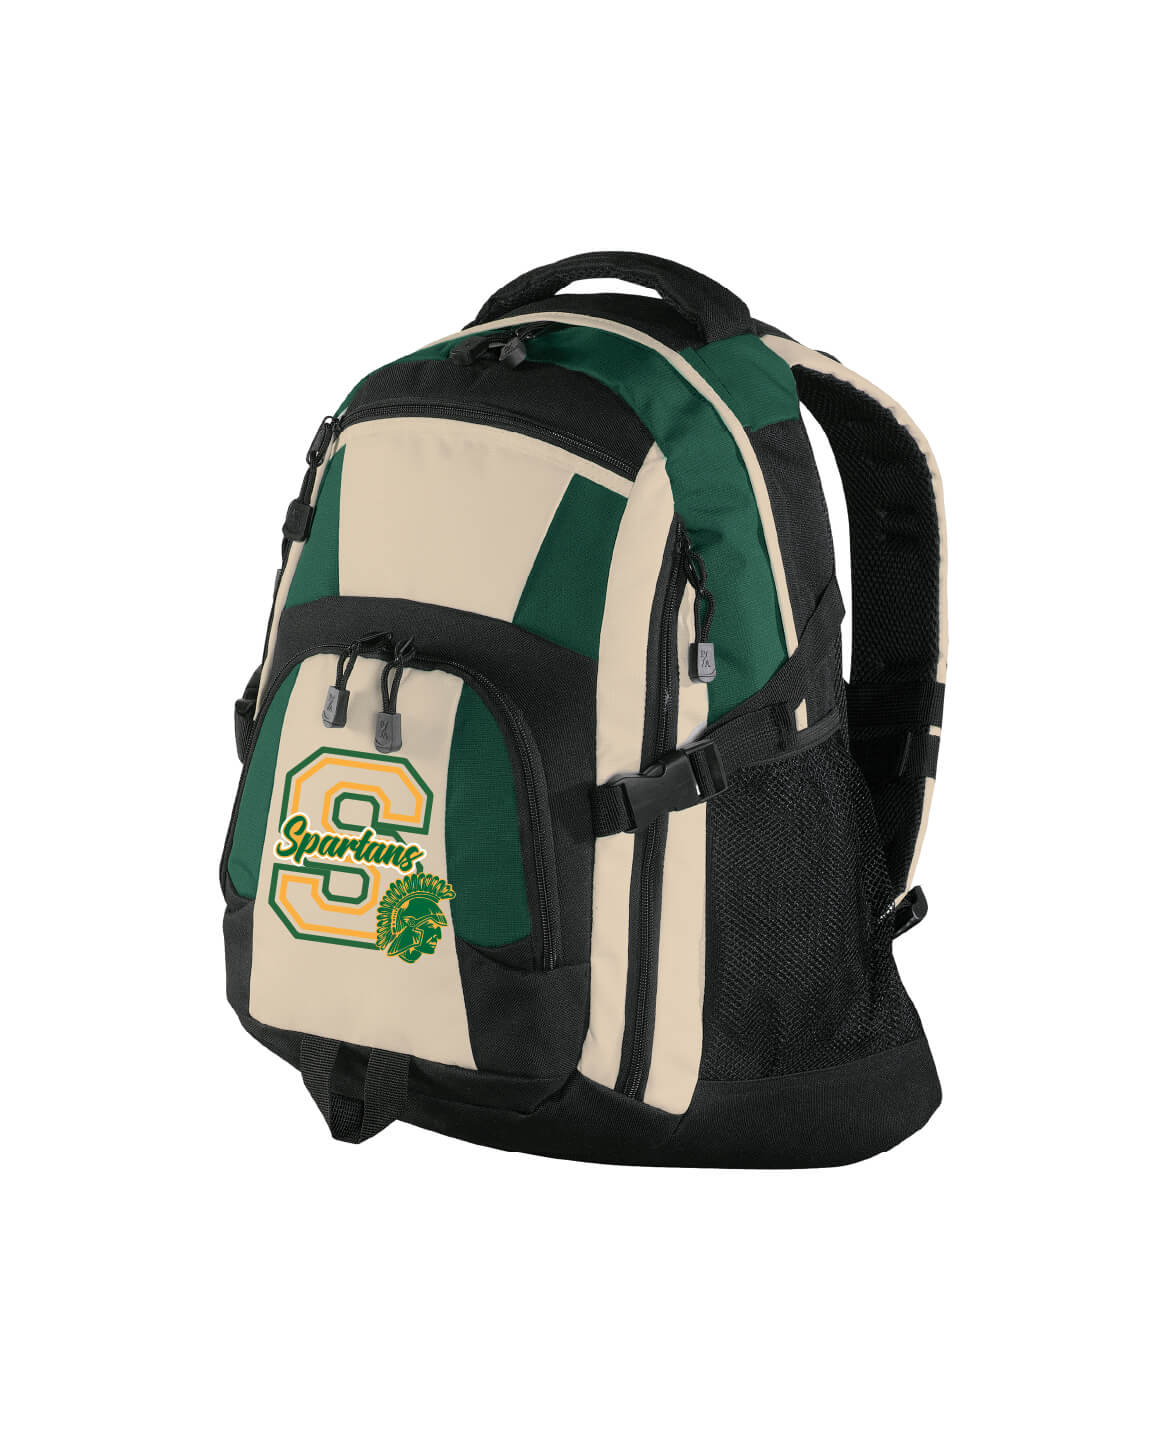 Backpack Spartans "S"